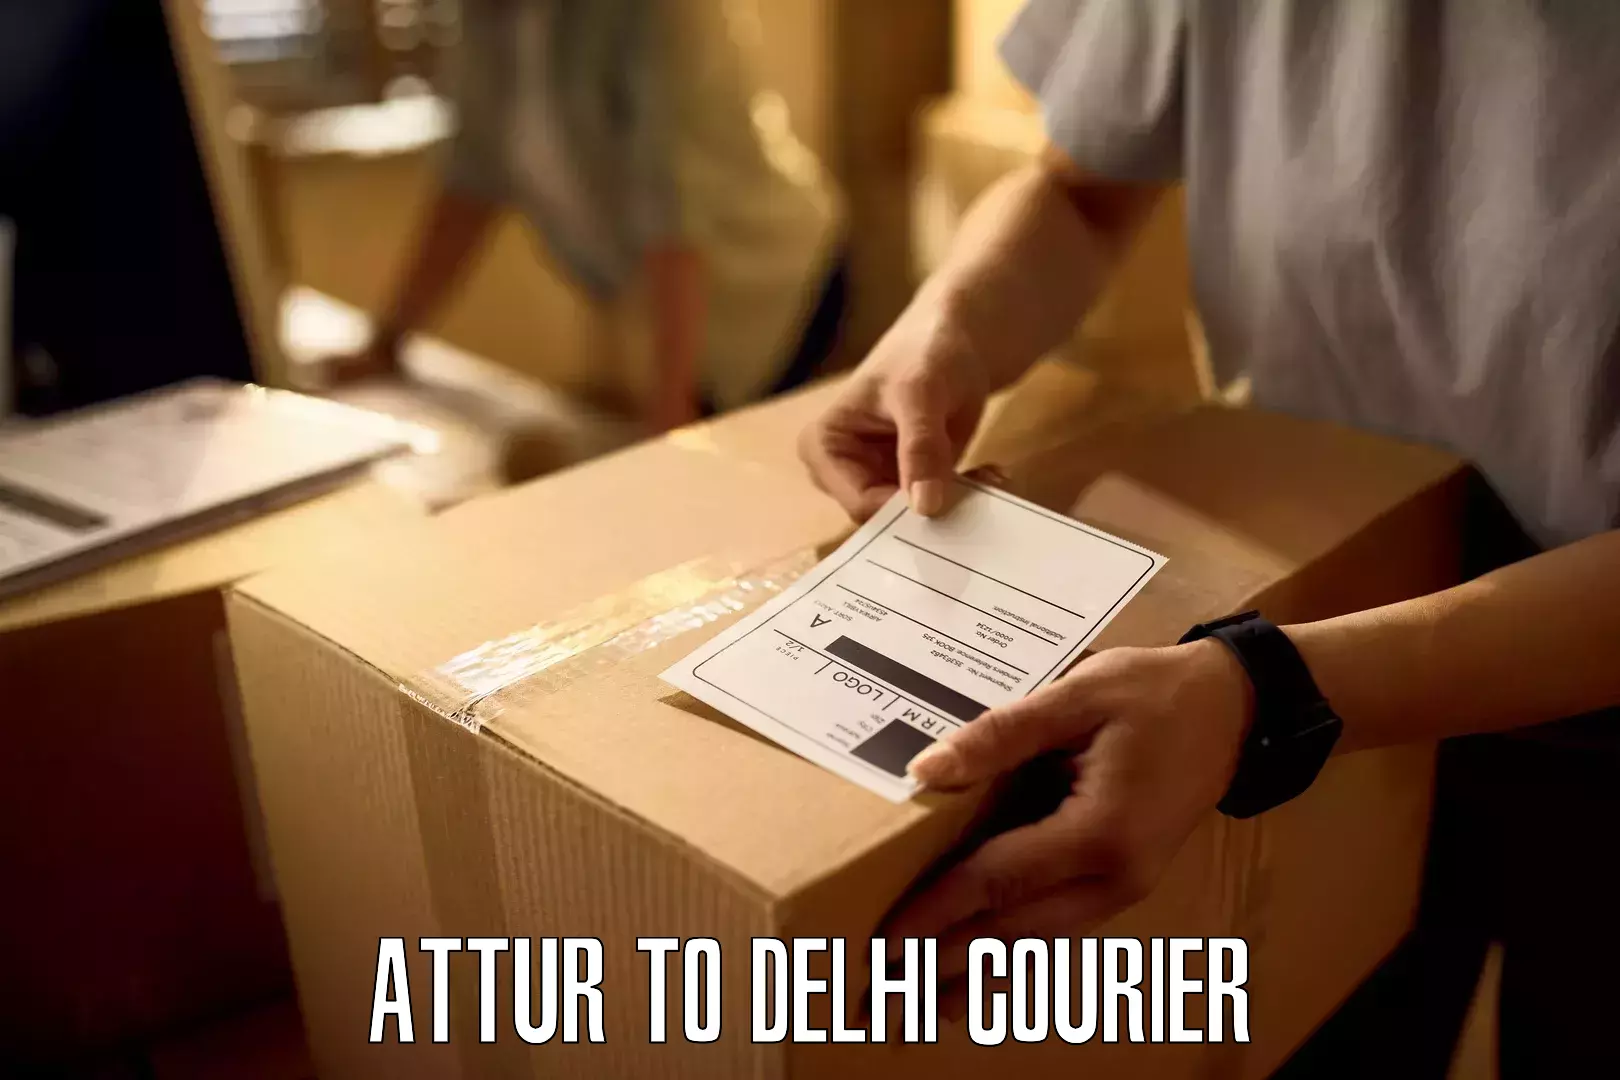 On-call courier service Attur to Delhi Technological University DTU